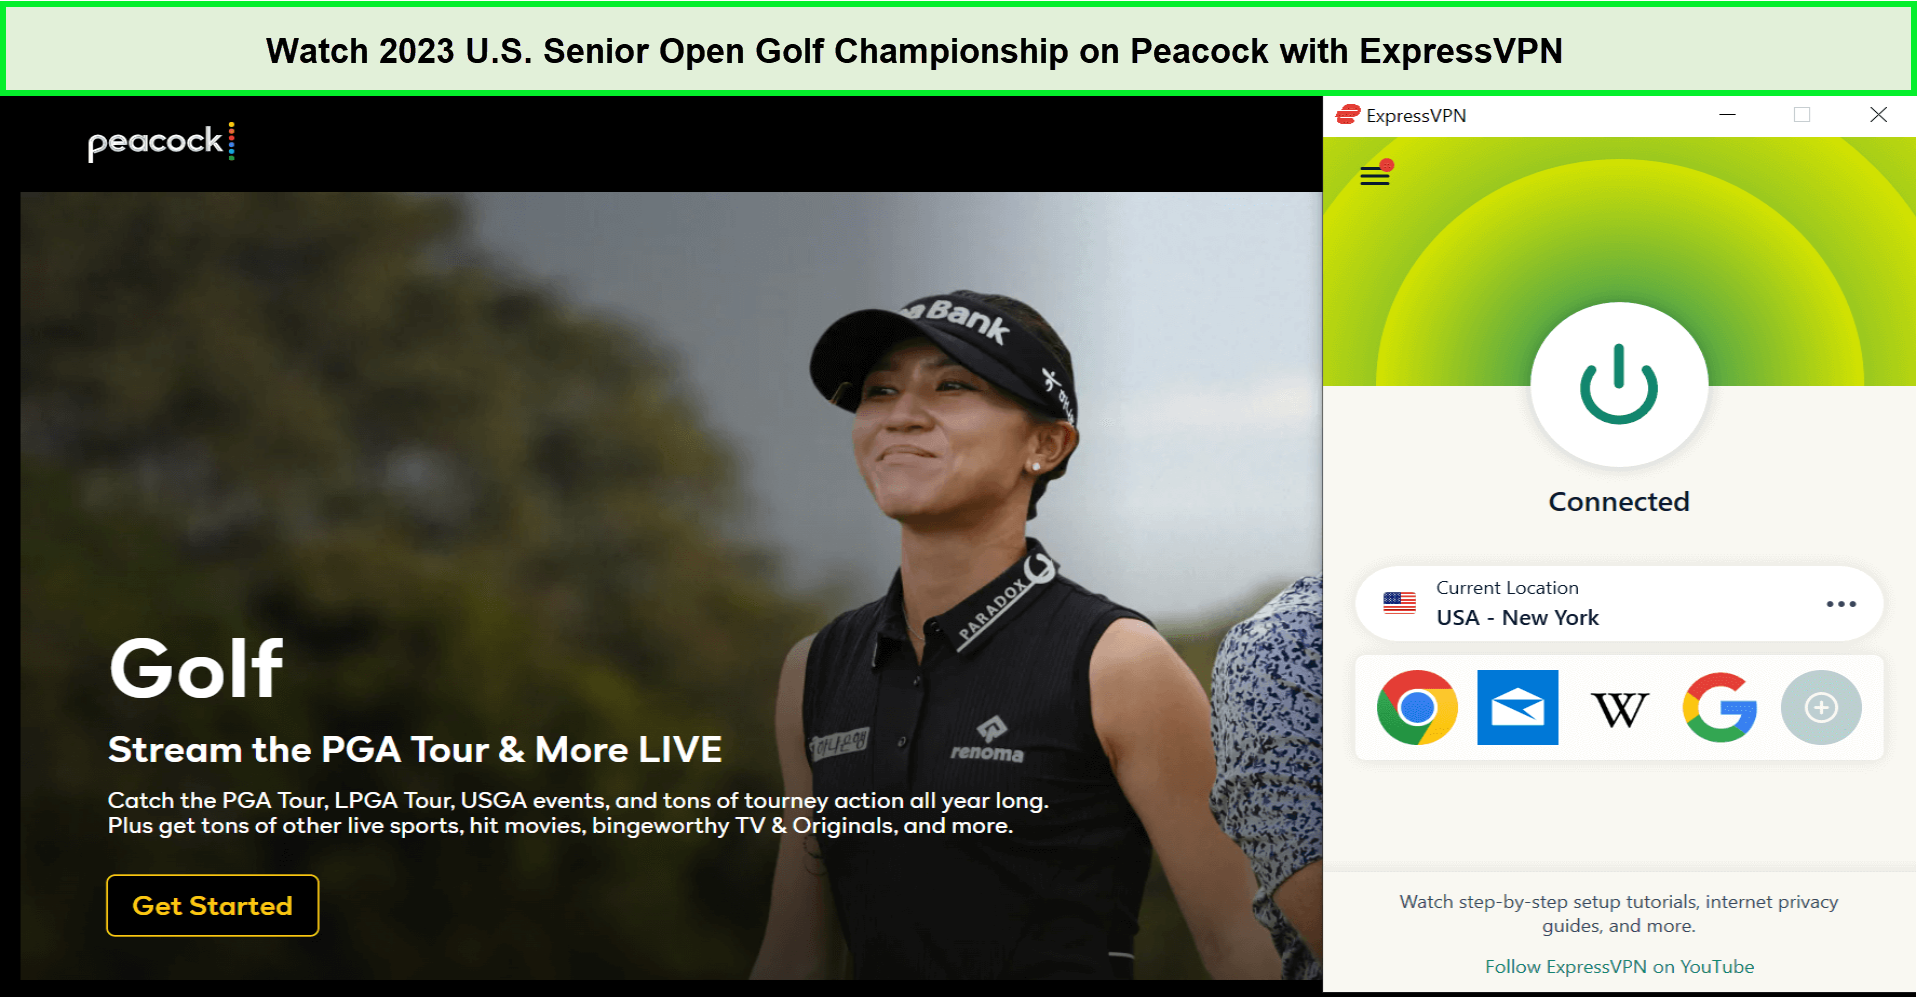 Watch-2023-U.S.-Senior-Open-Golf-Championship-in-India-on-Peacock-with-ExpressVPN